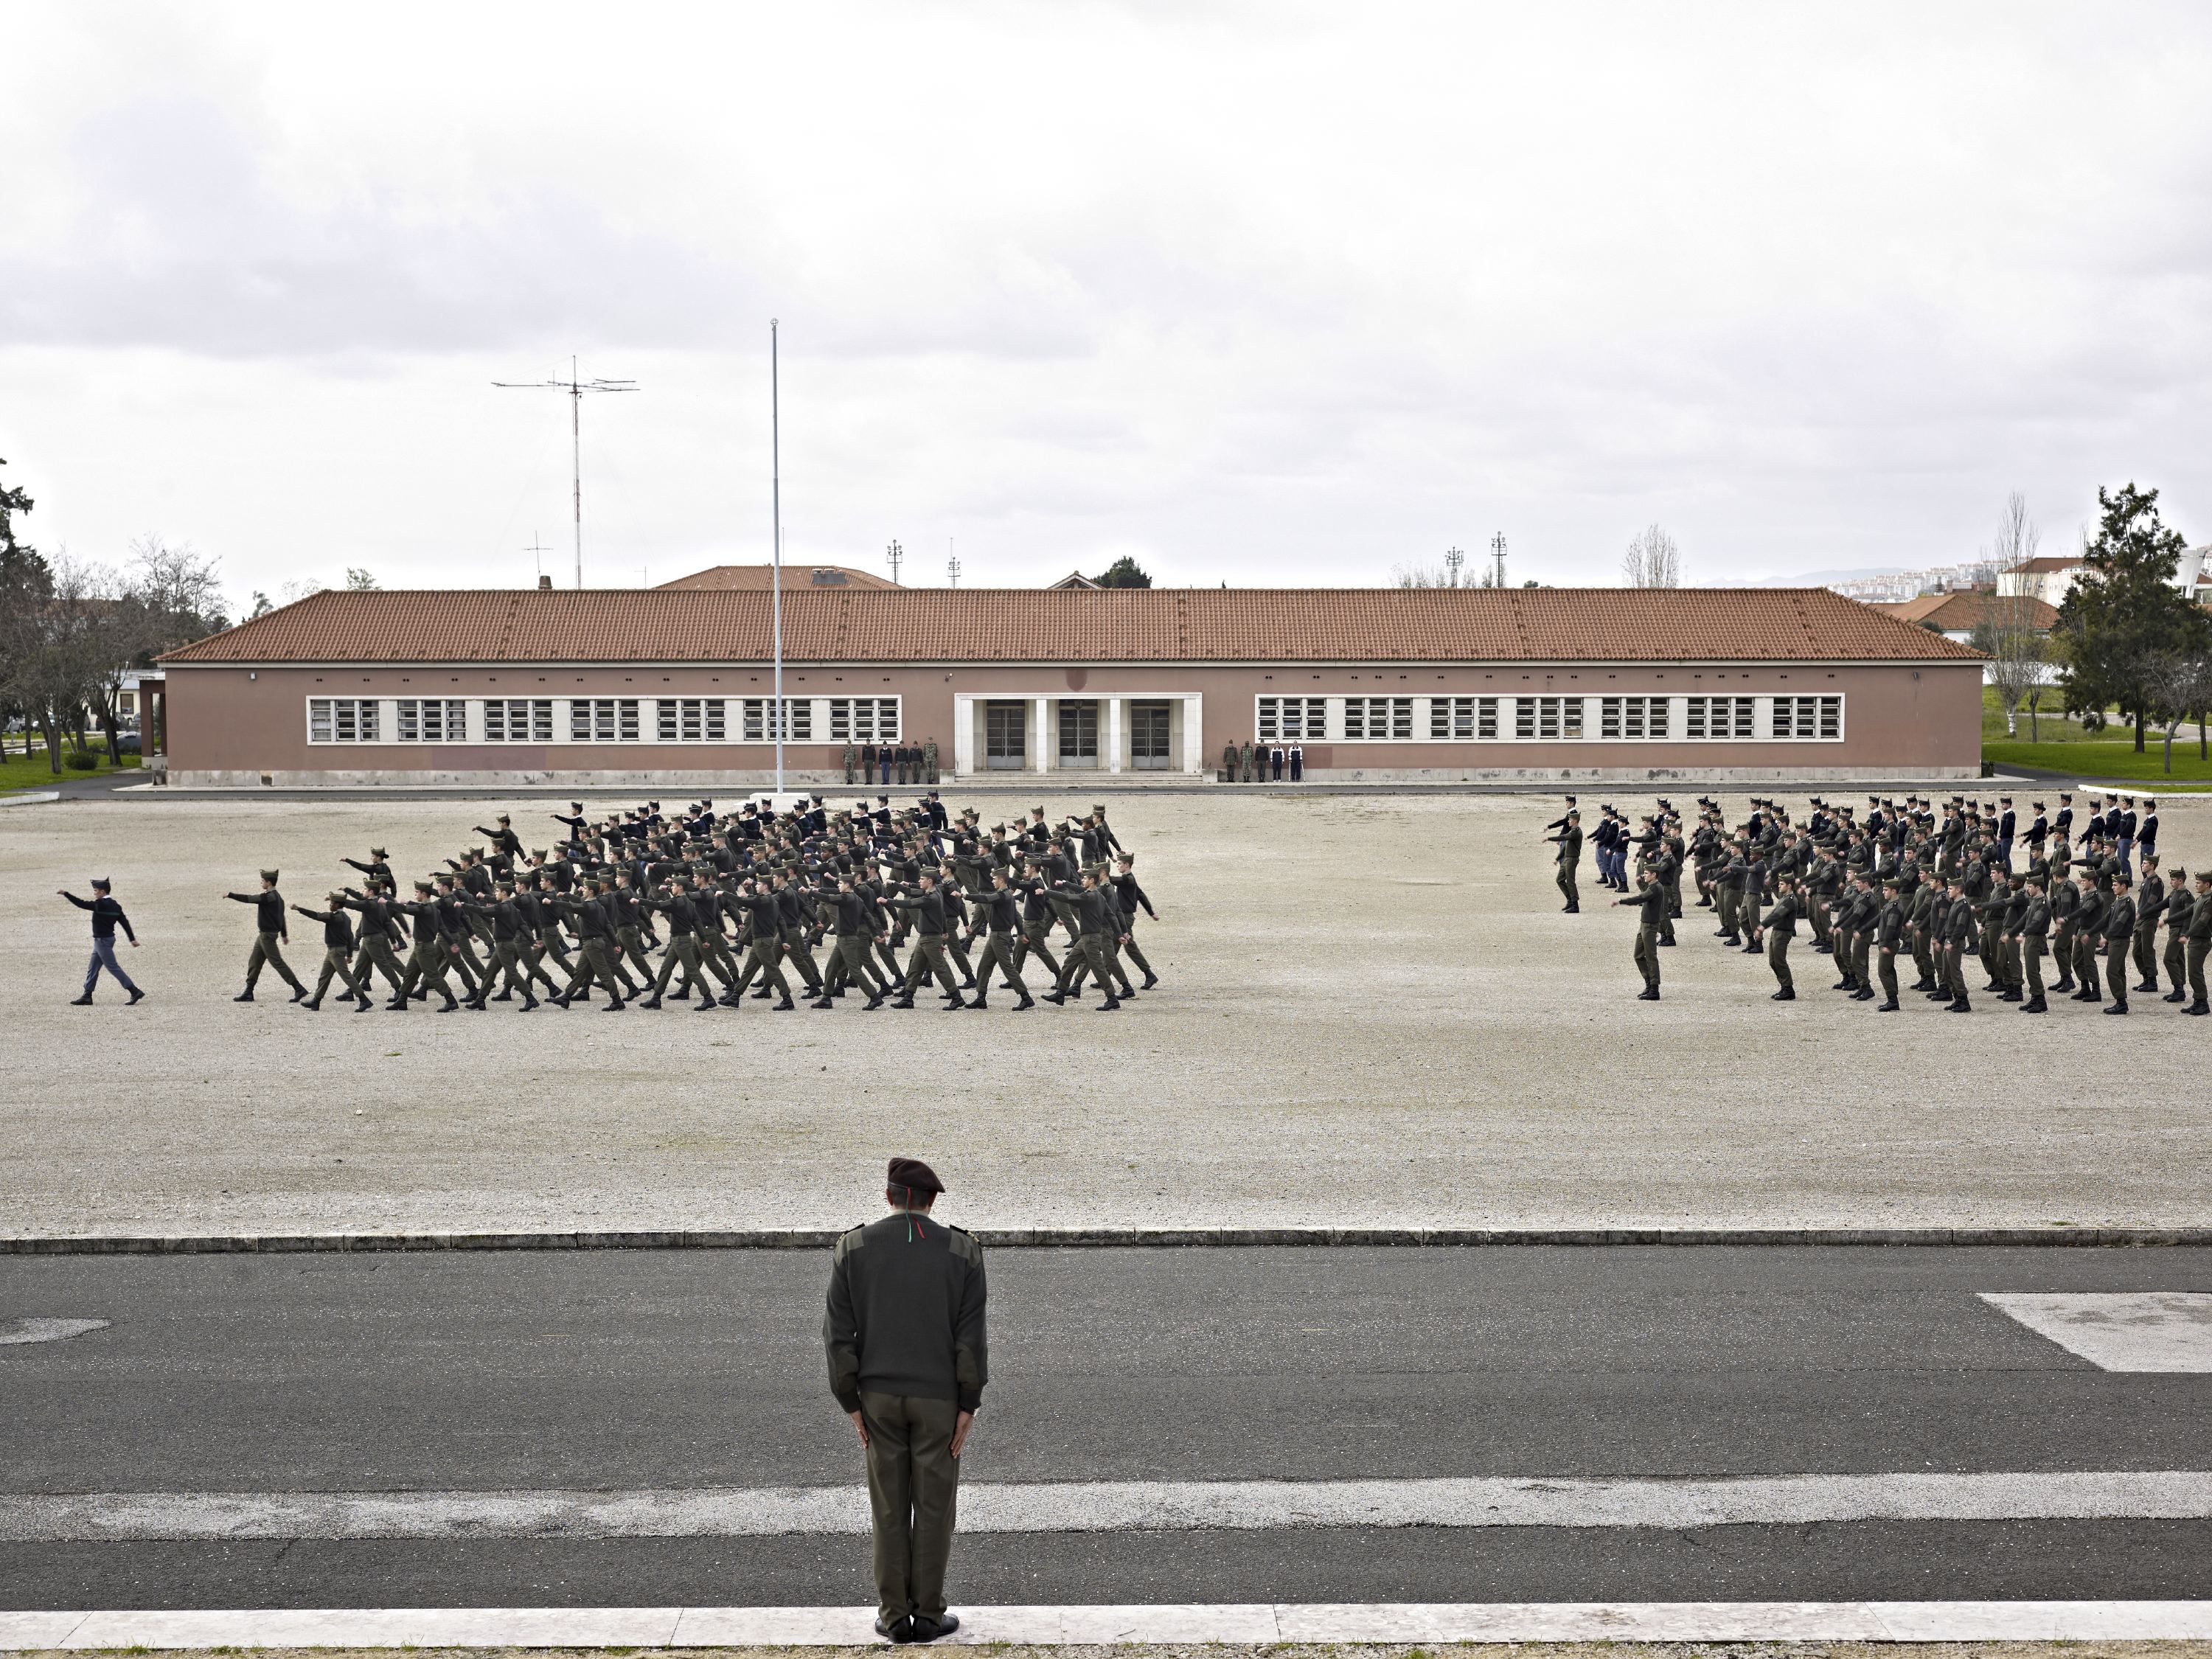 Cadets gathering in the main court of Academia Militar, Lisbon, Portugal,  Dec. 5, 2012.